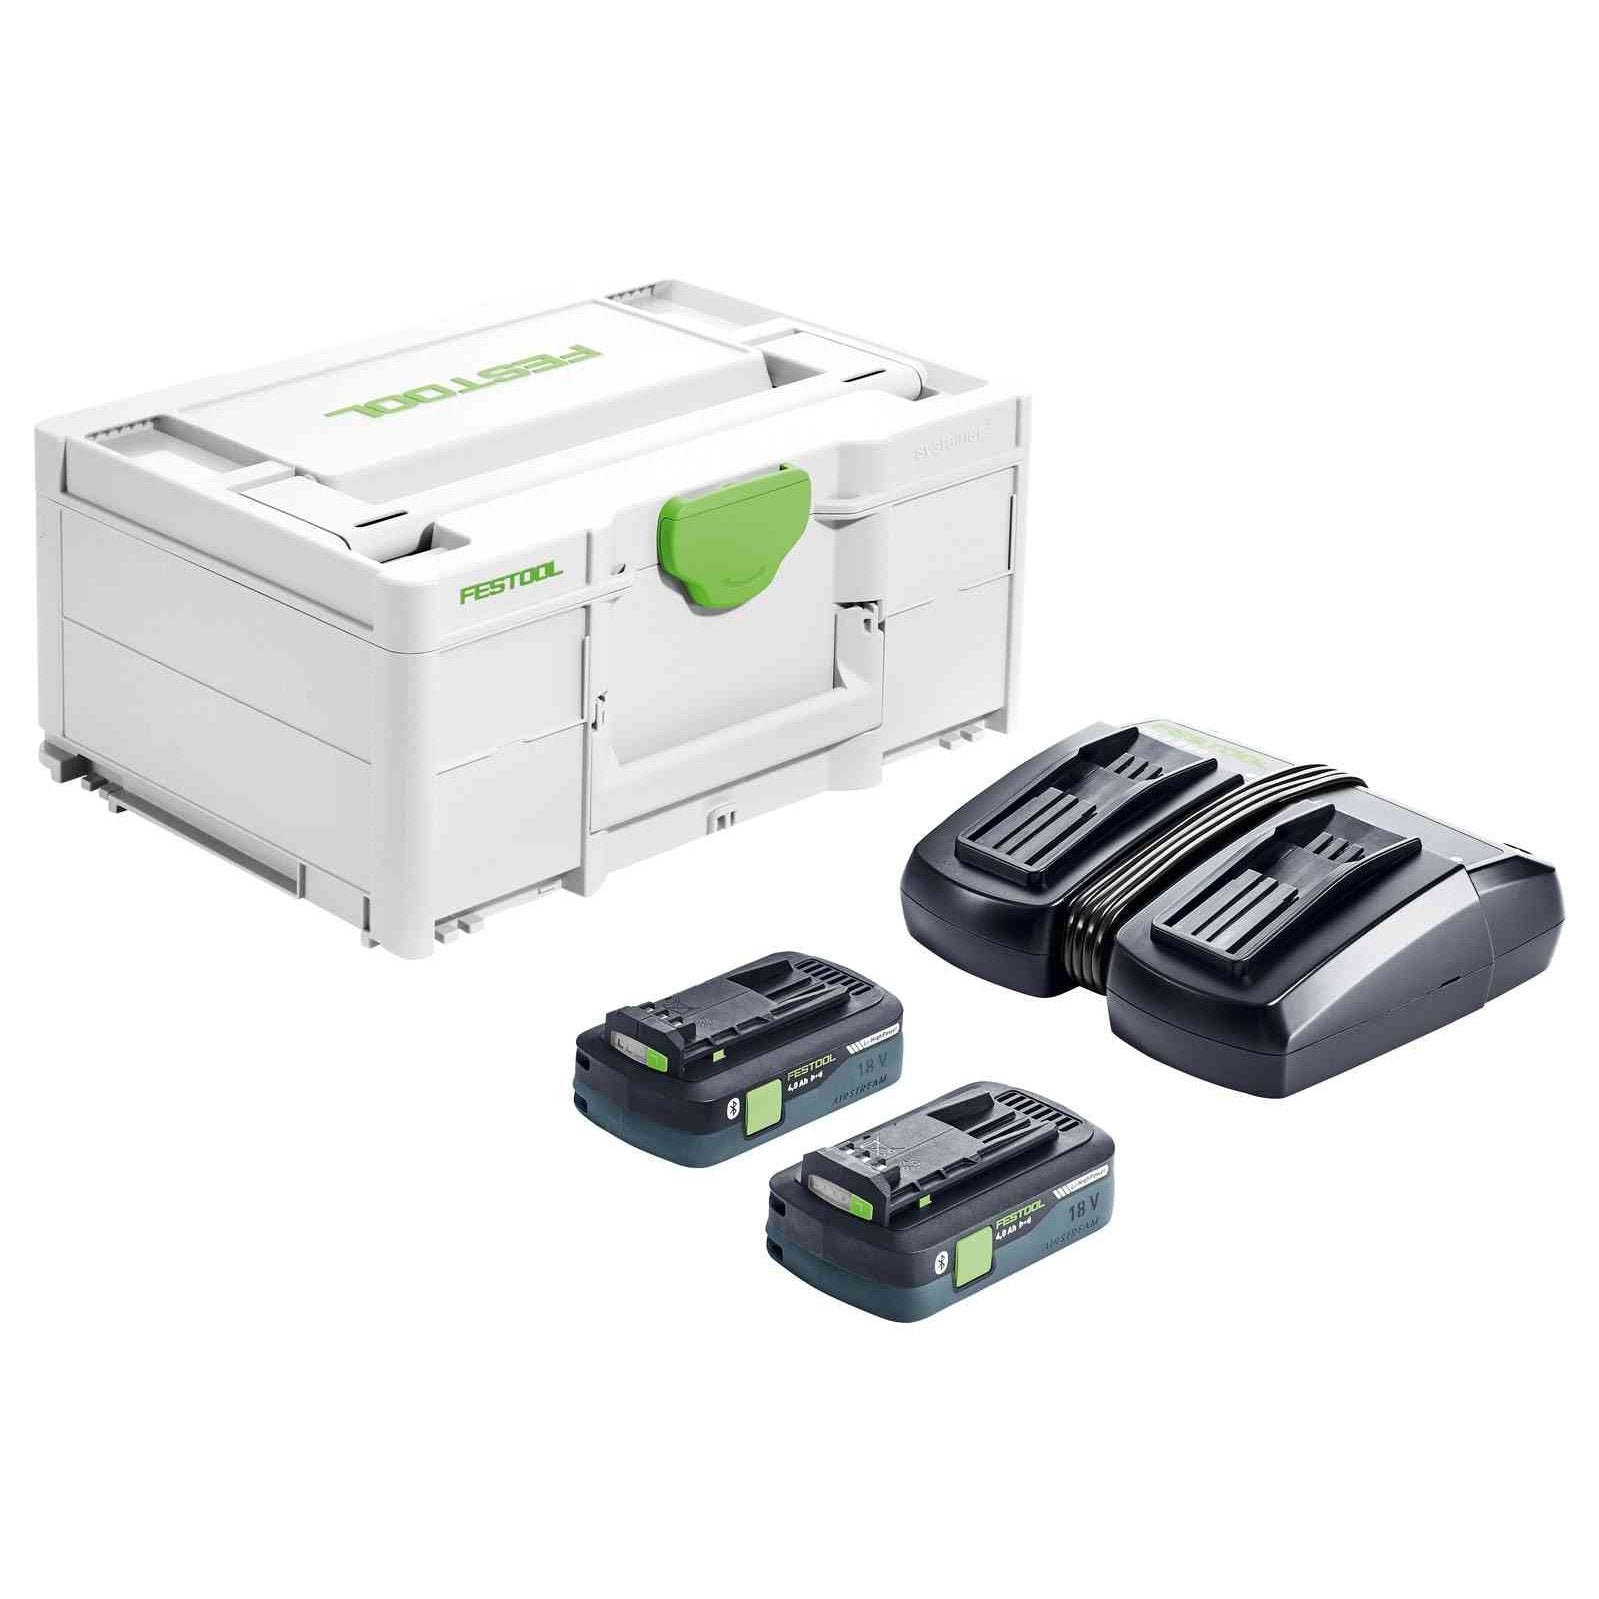 Festool 4 Ah Battery & Charger Set, Energy Set SYS 18V 2x4.0/TCL 6 DUO 577106 tool-junction-nz